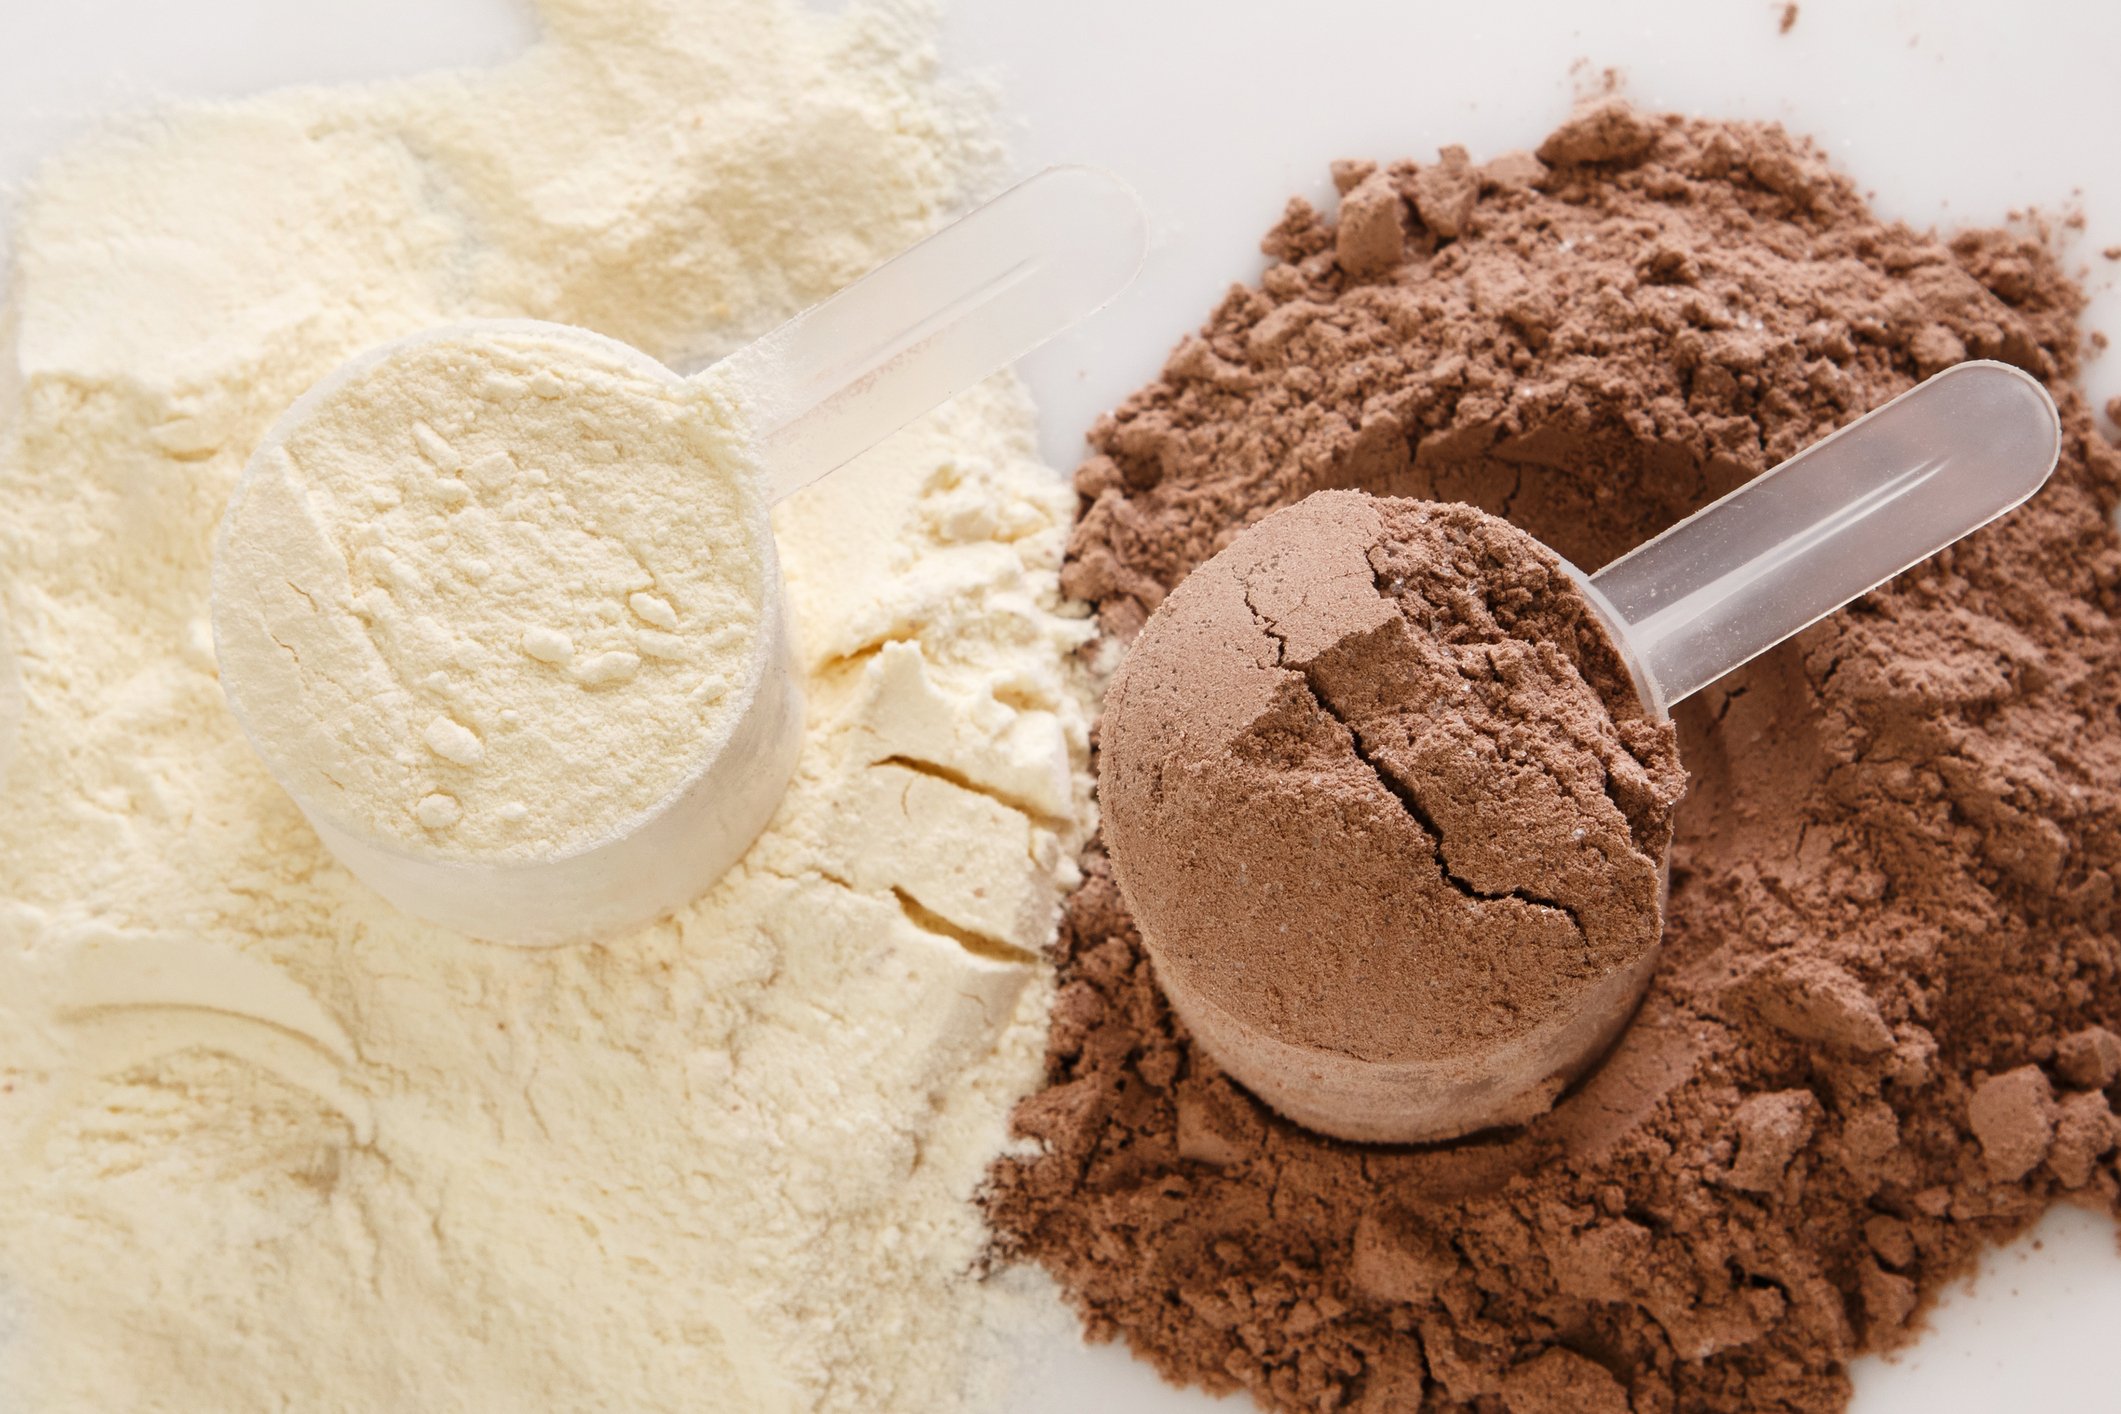 Protein powder containing soy is not a good food to eat when trying to get pregnant.